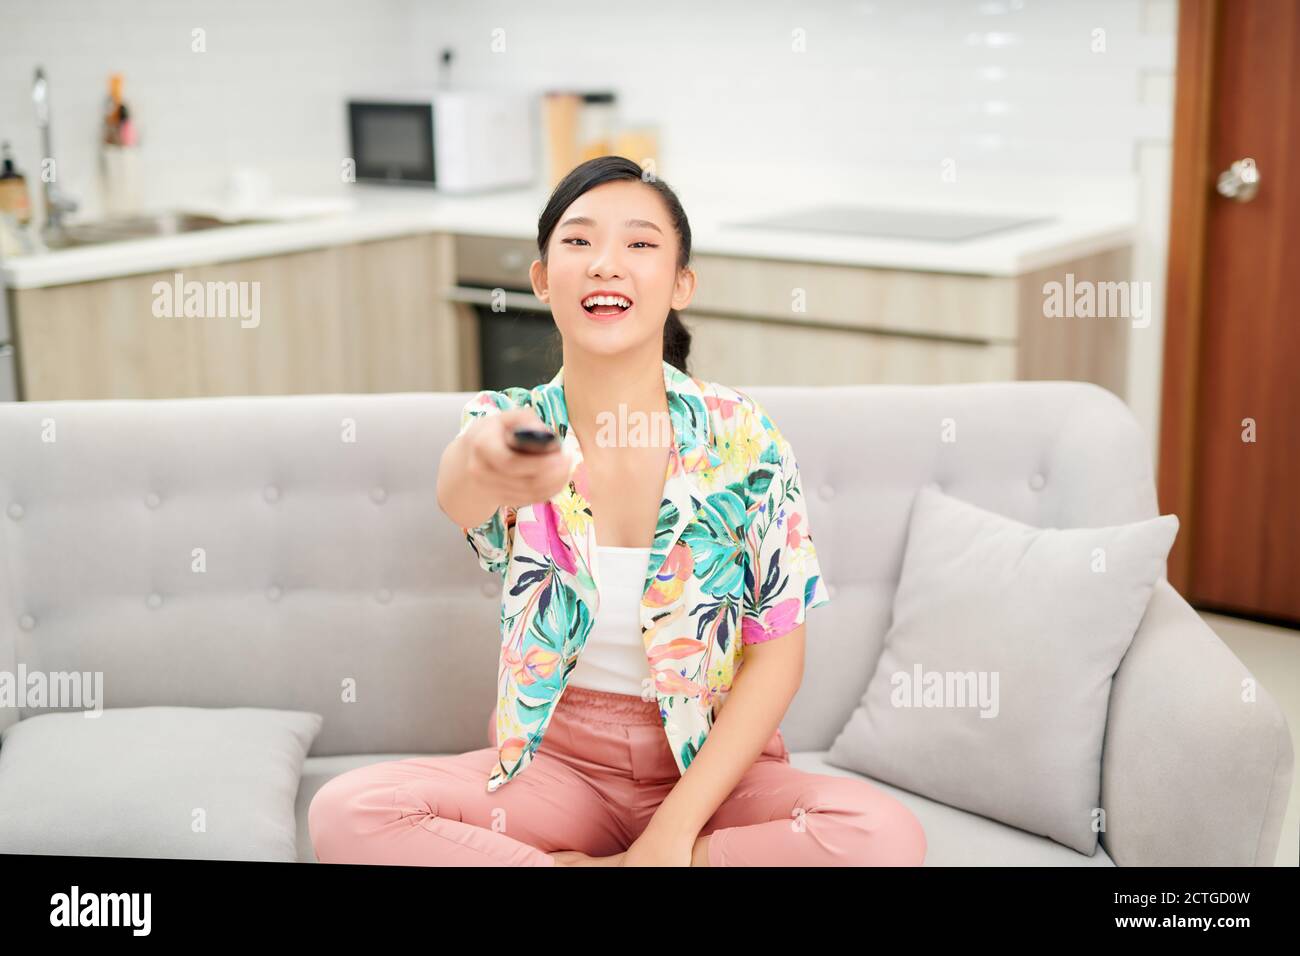 television, relax, home and happiness concept - smiling teenage girl sitting on couch with tv remote control at home Stock Photo